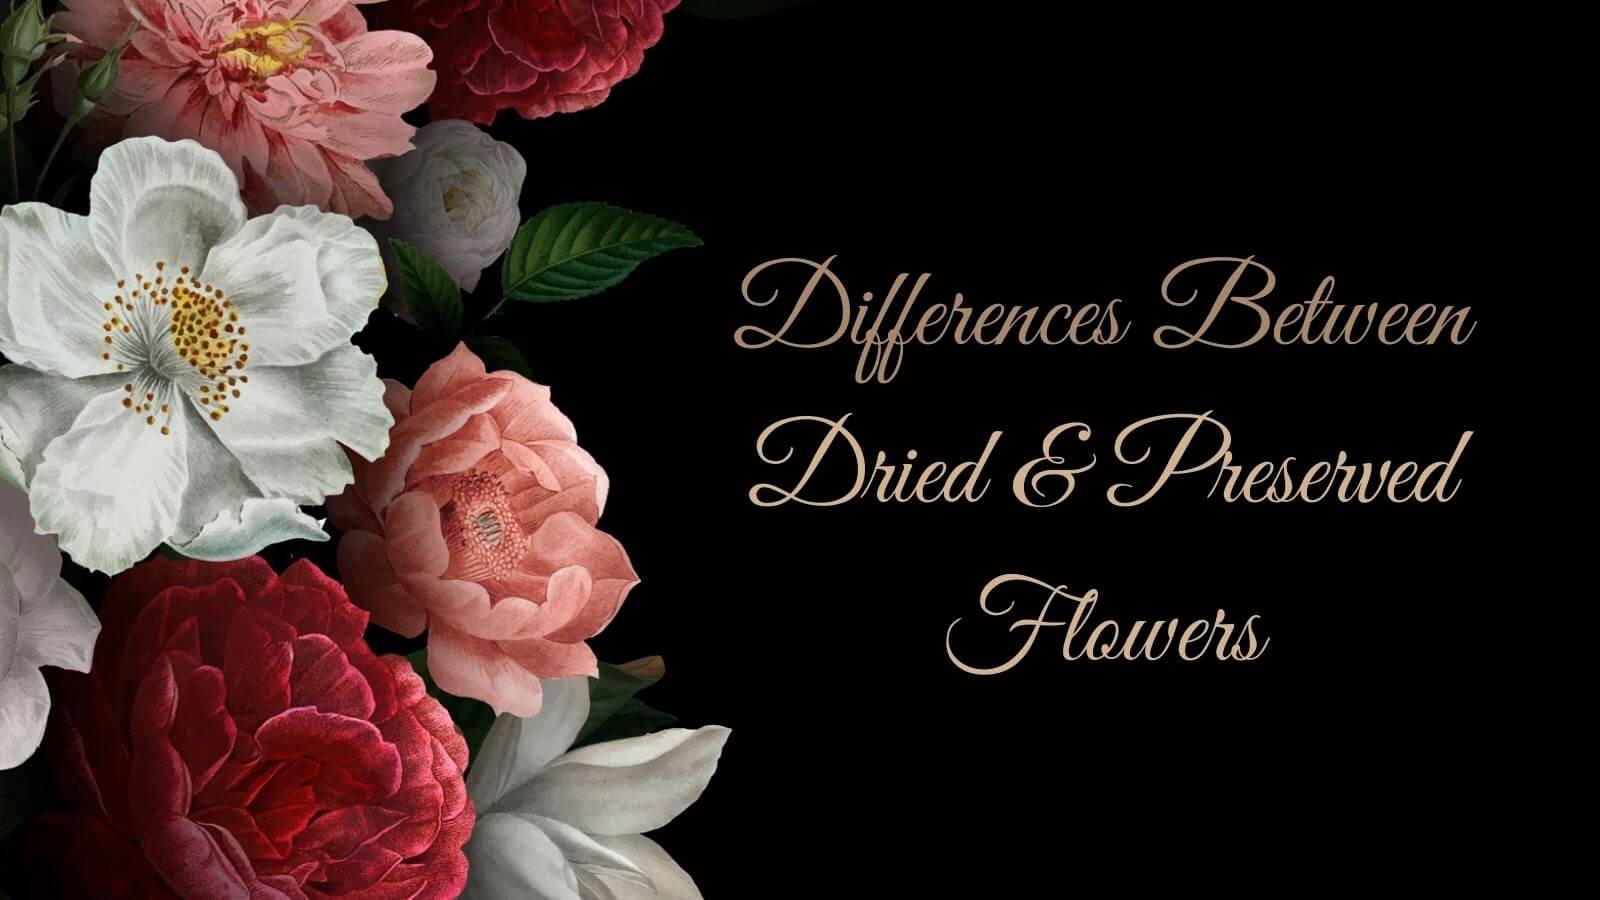 Flowers with text "Differences Between Dried and Preserved Flowers"